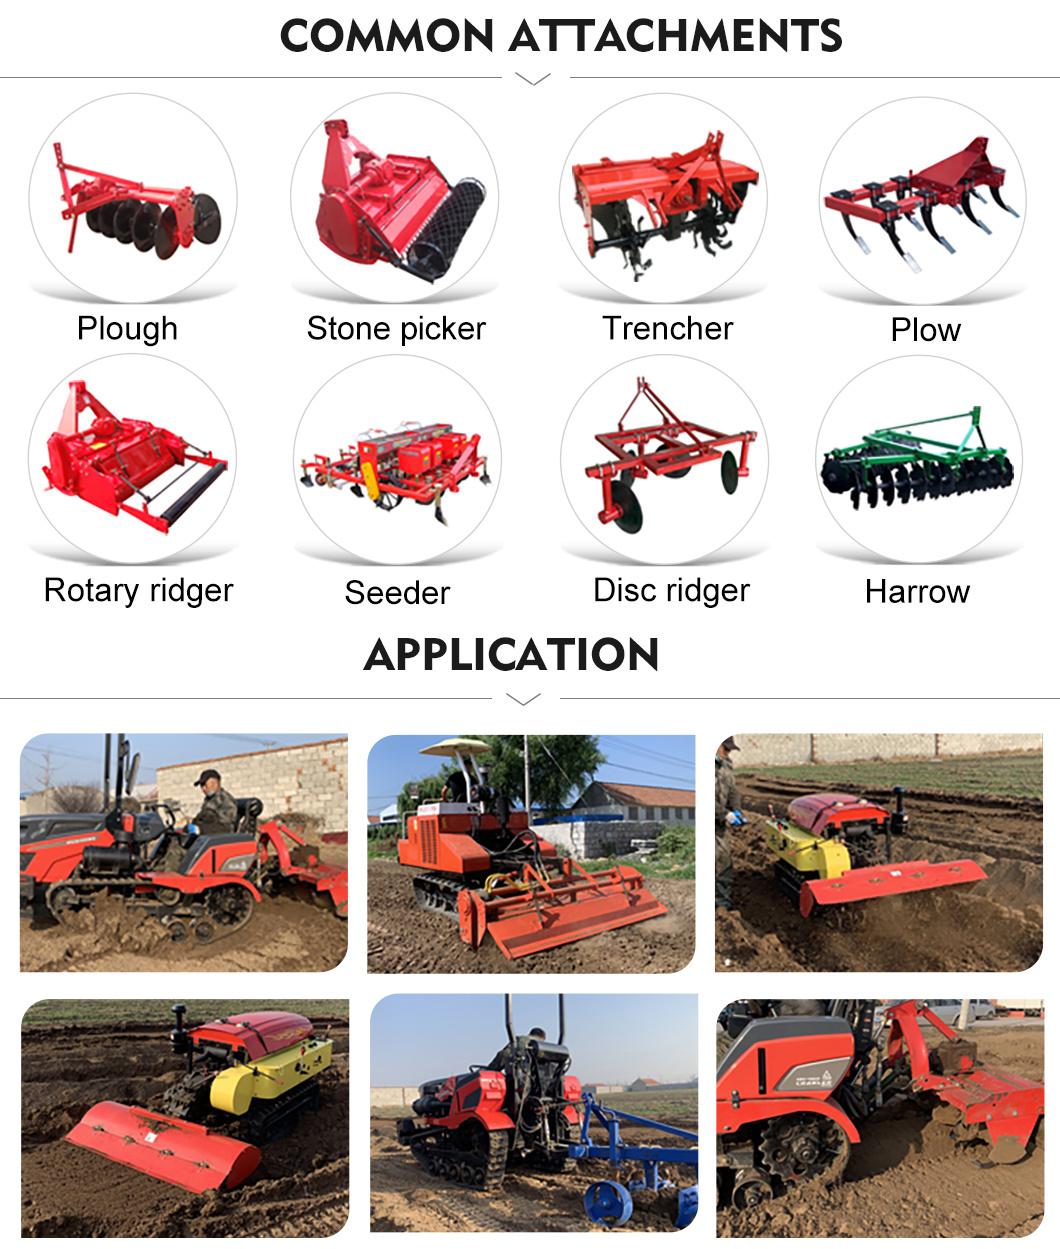 Powerful Crawler Tractor Agricultural Multifunctional Chain Track Cultivator for Agriculture